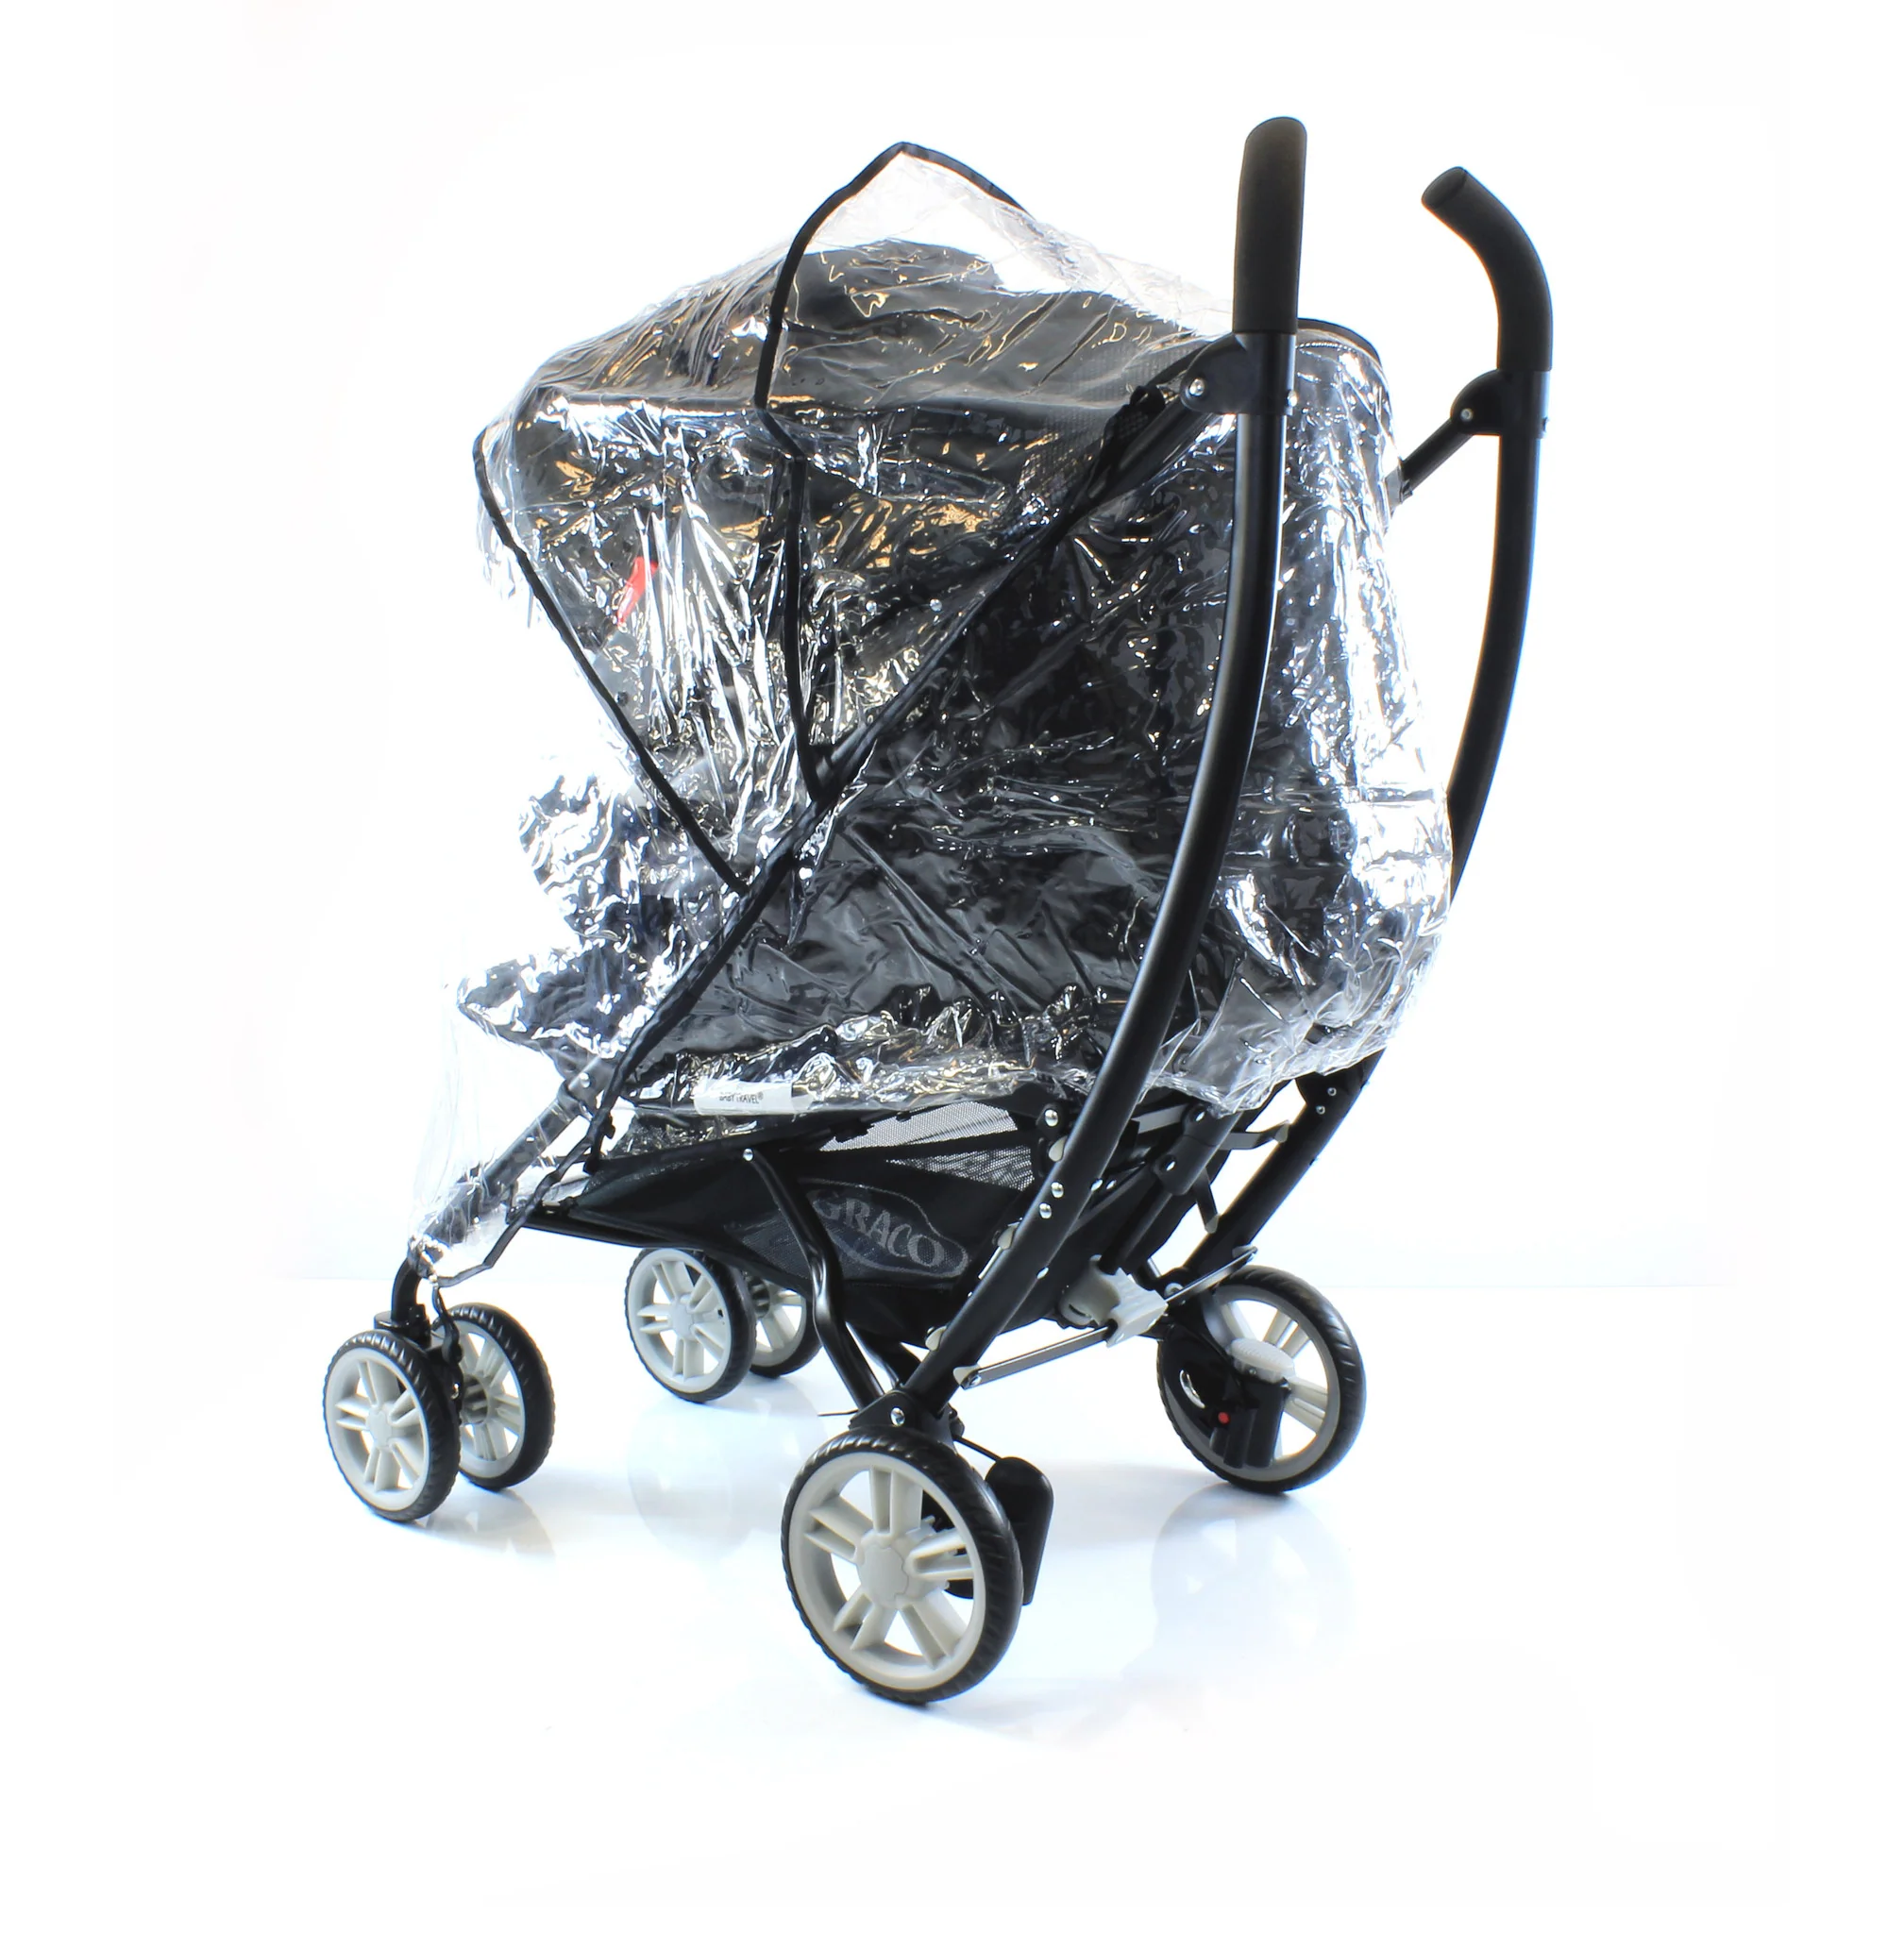 Graco Raincover For Graco Mirage Travel System 